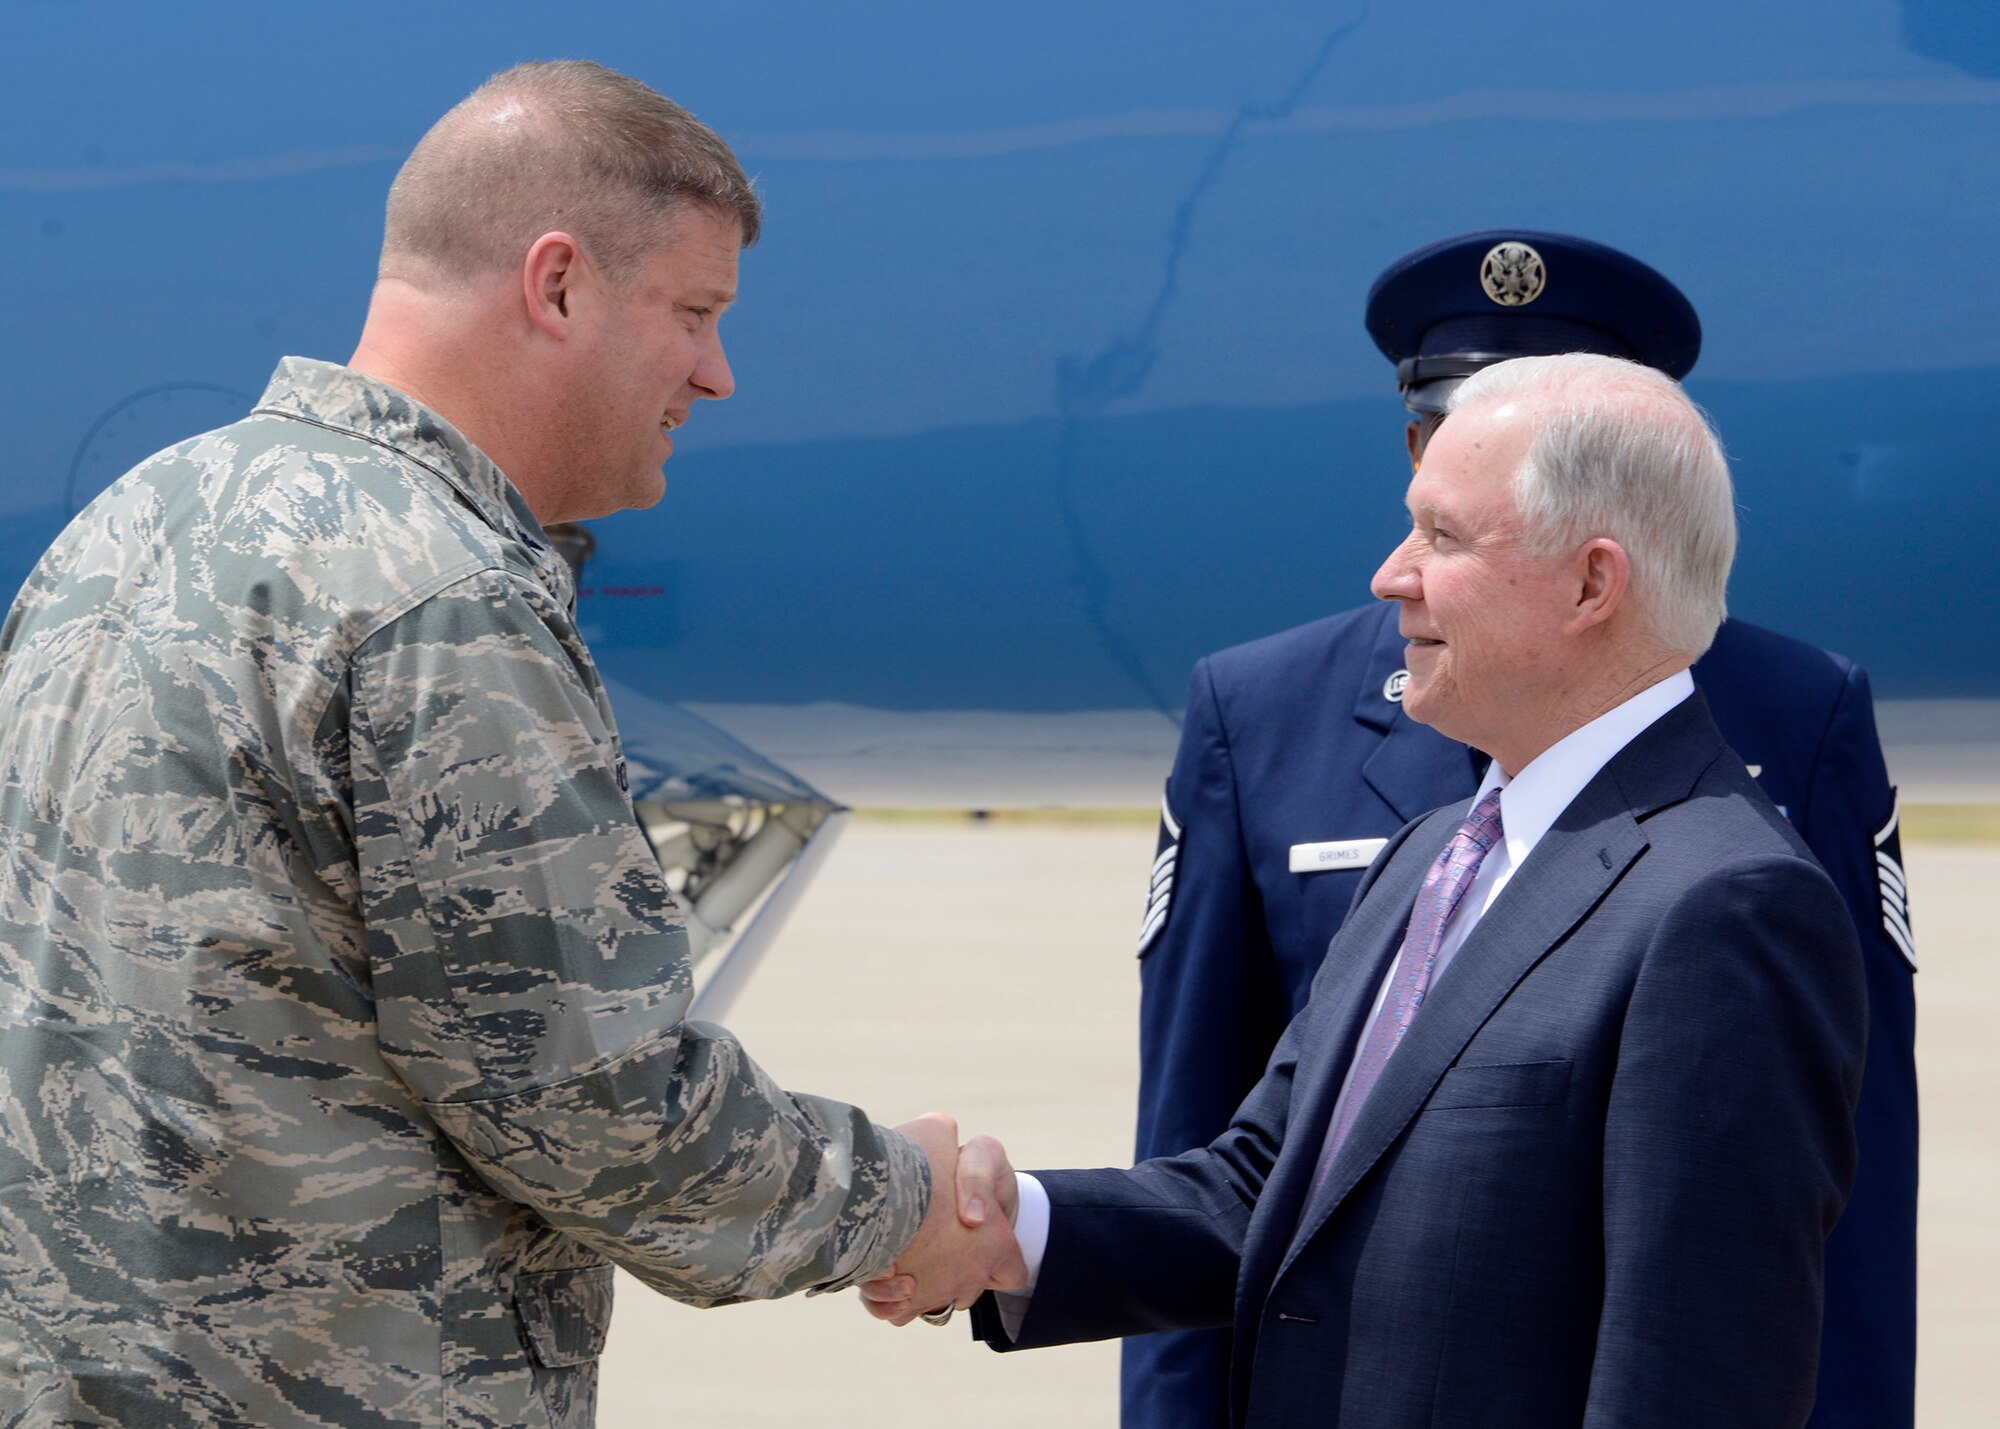 Attorney General of the United States Jefferson Sessions III shakes hands with Col. David Shoemaker, 56th Fighter Wing vice commander, after landing April 11, 2017, at Luke Air Force Base, Ariz. During his visit, Sessions held an all-call for Airmen discussing veteran’s rights.  (U.S. Air Force photo by Senior Airman Devante Williams)